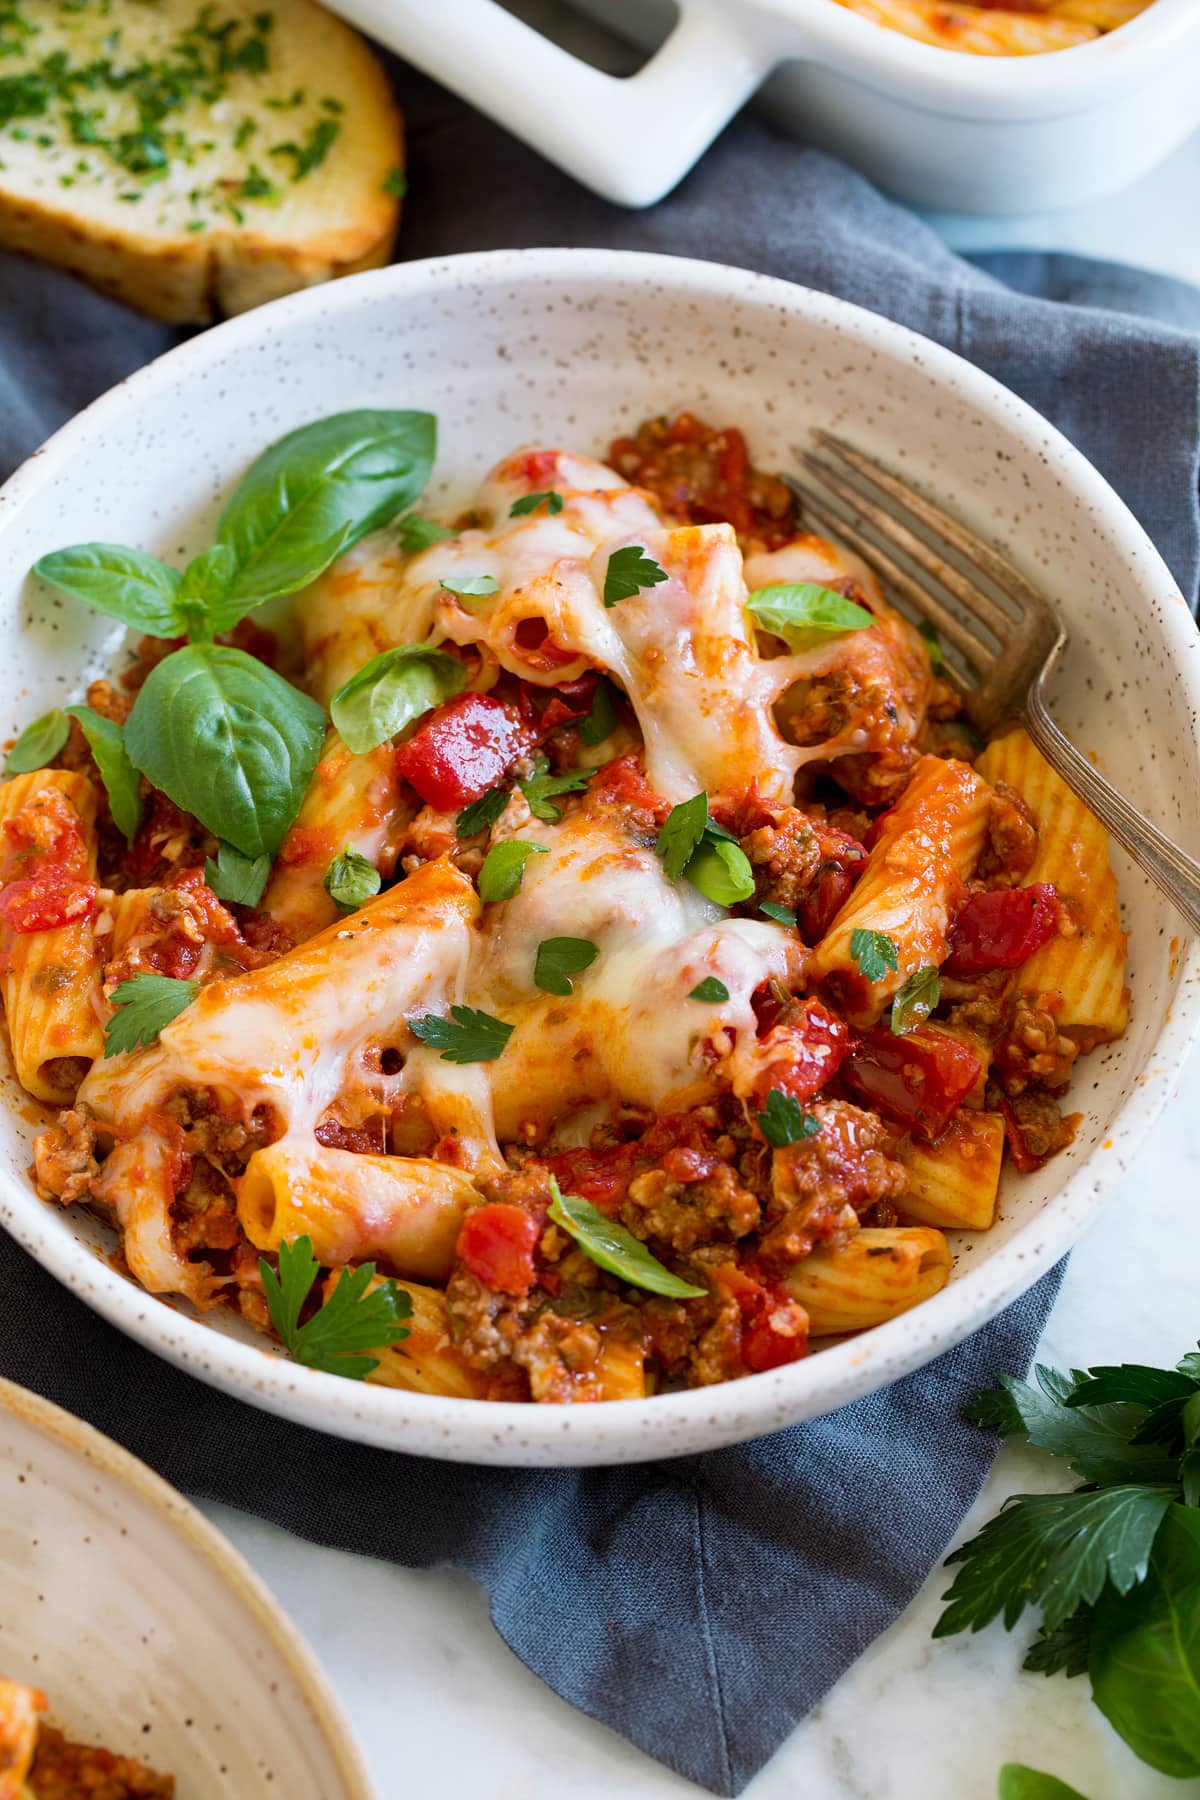 Rigatoni pasta with marinara sauce, beef and cheeses shown served in a pasta bowl.